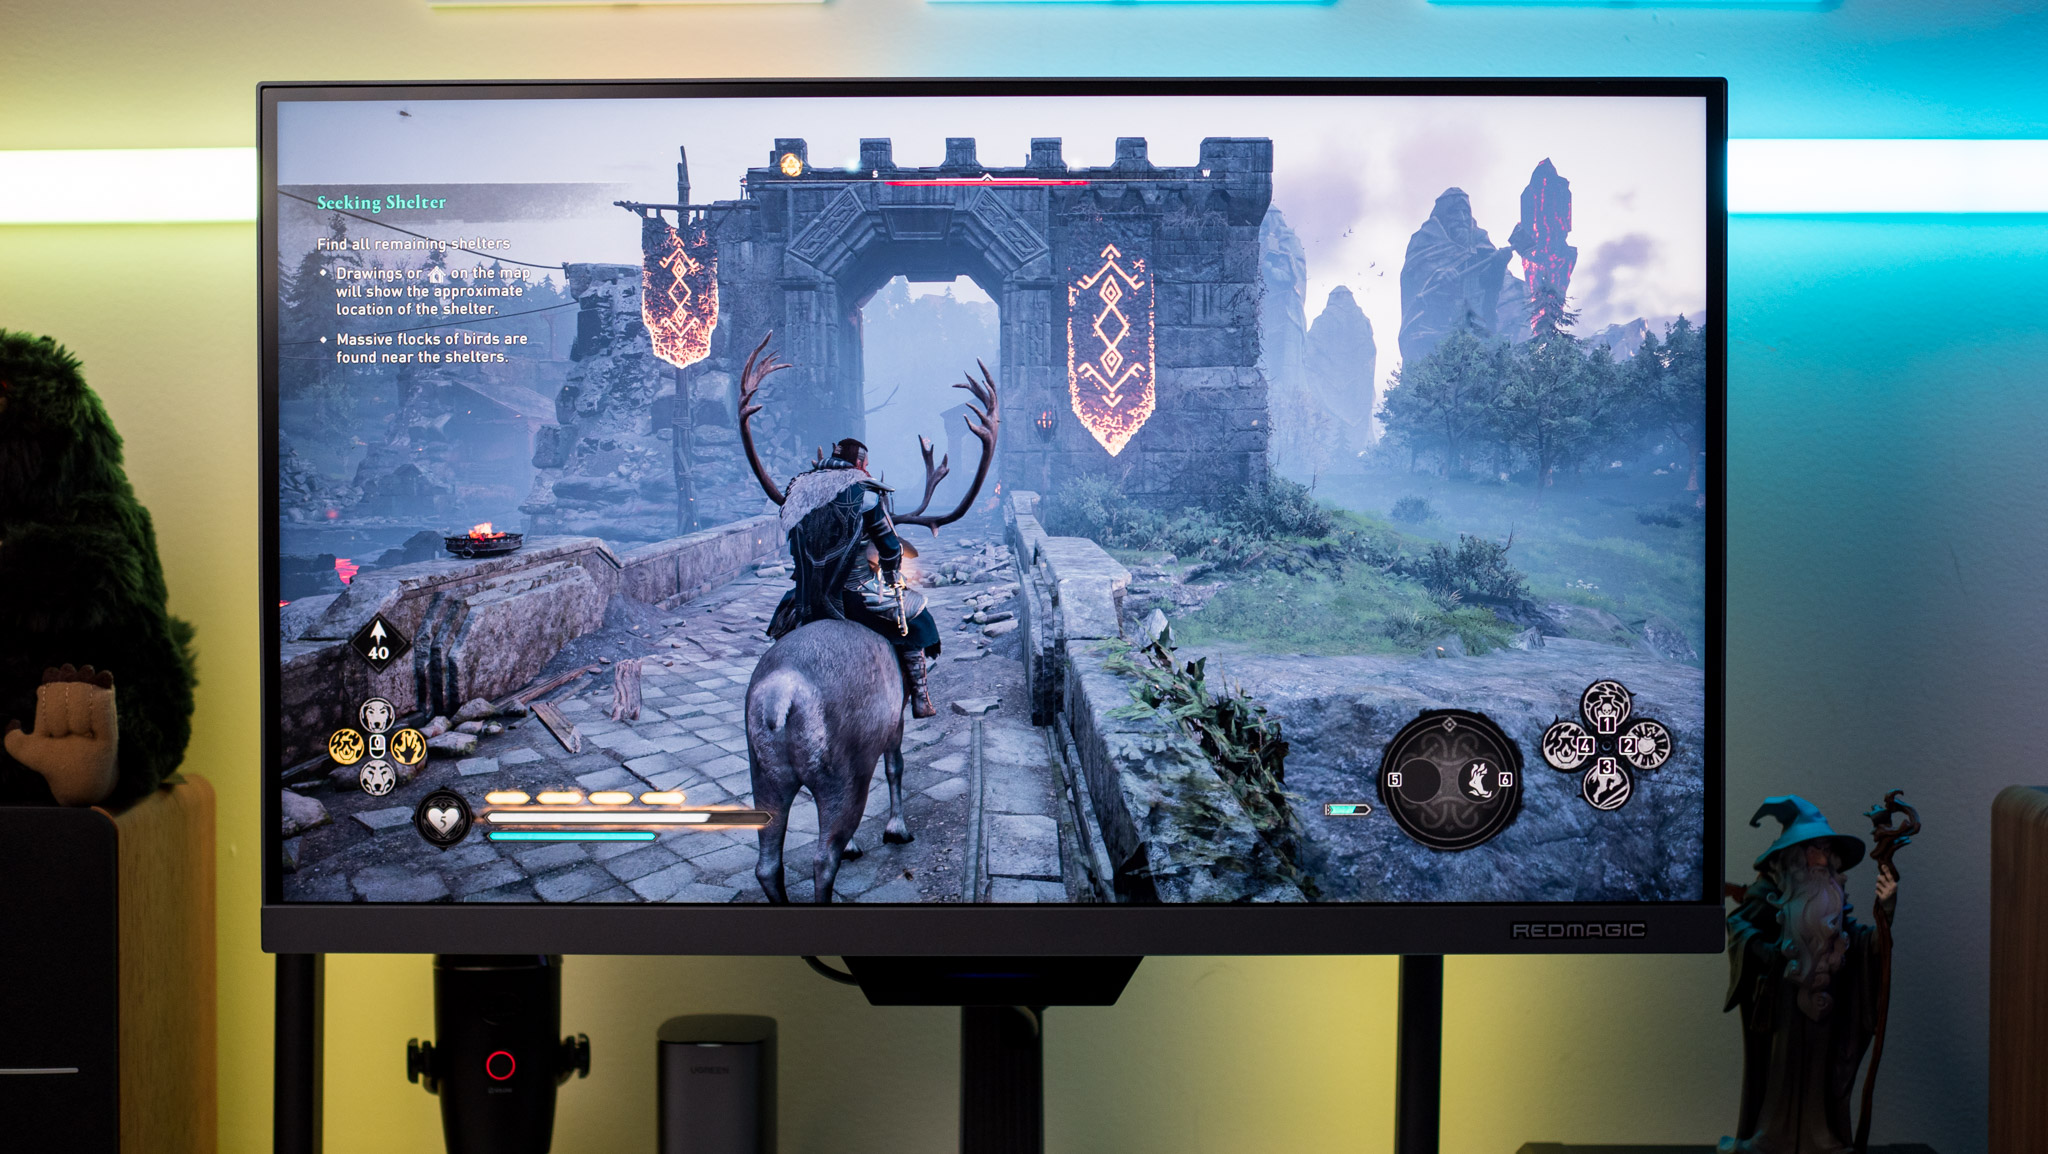 AC Valhalla on the screen of the Redmagic 4K Gaming Monitor